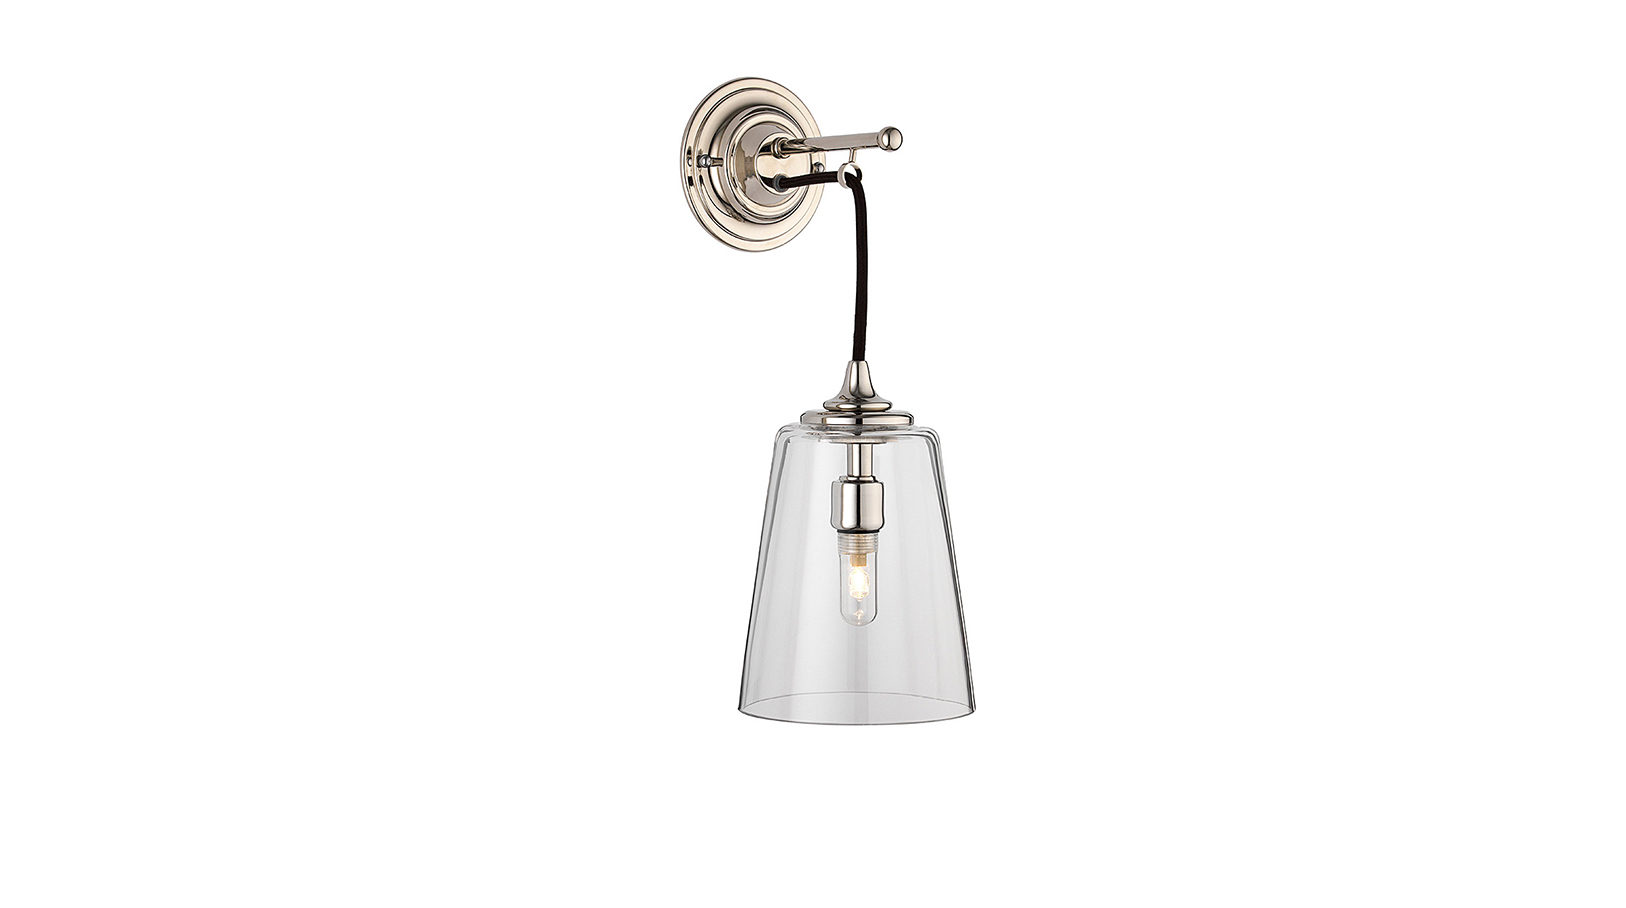 The Single Dalby Light, Conical Glass Shade